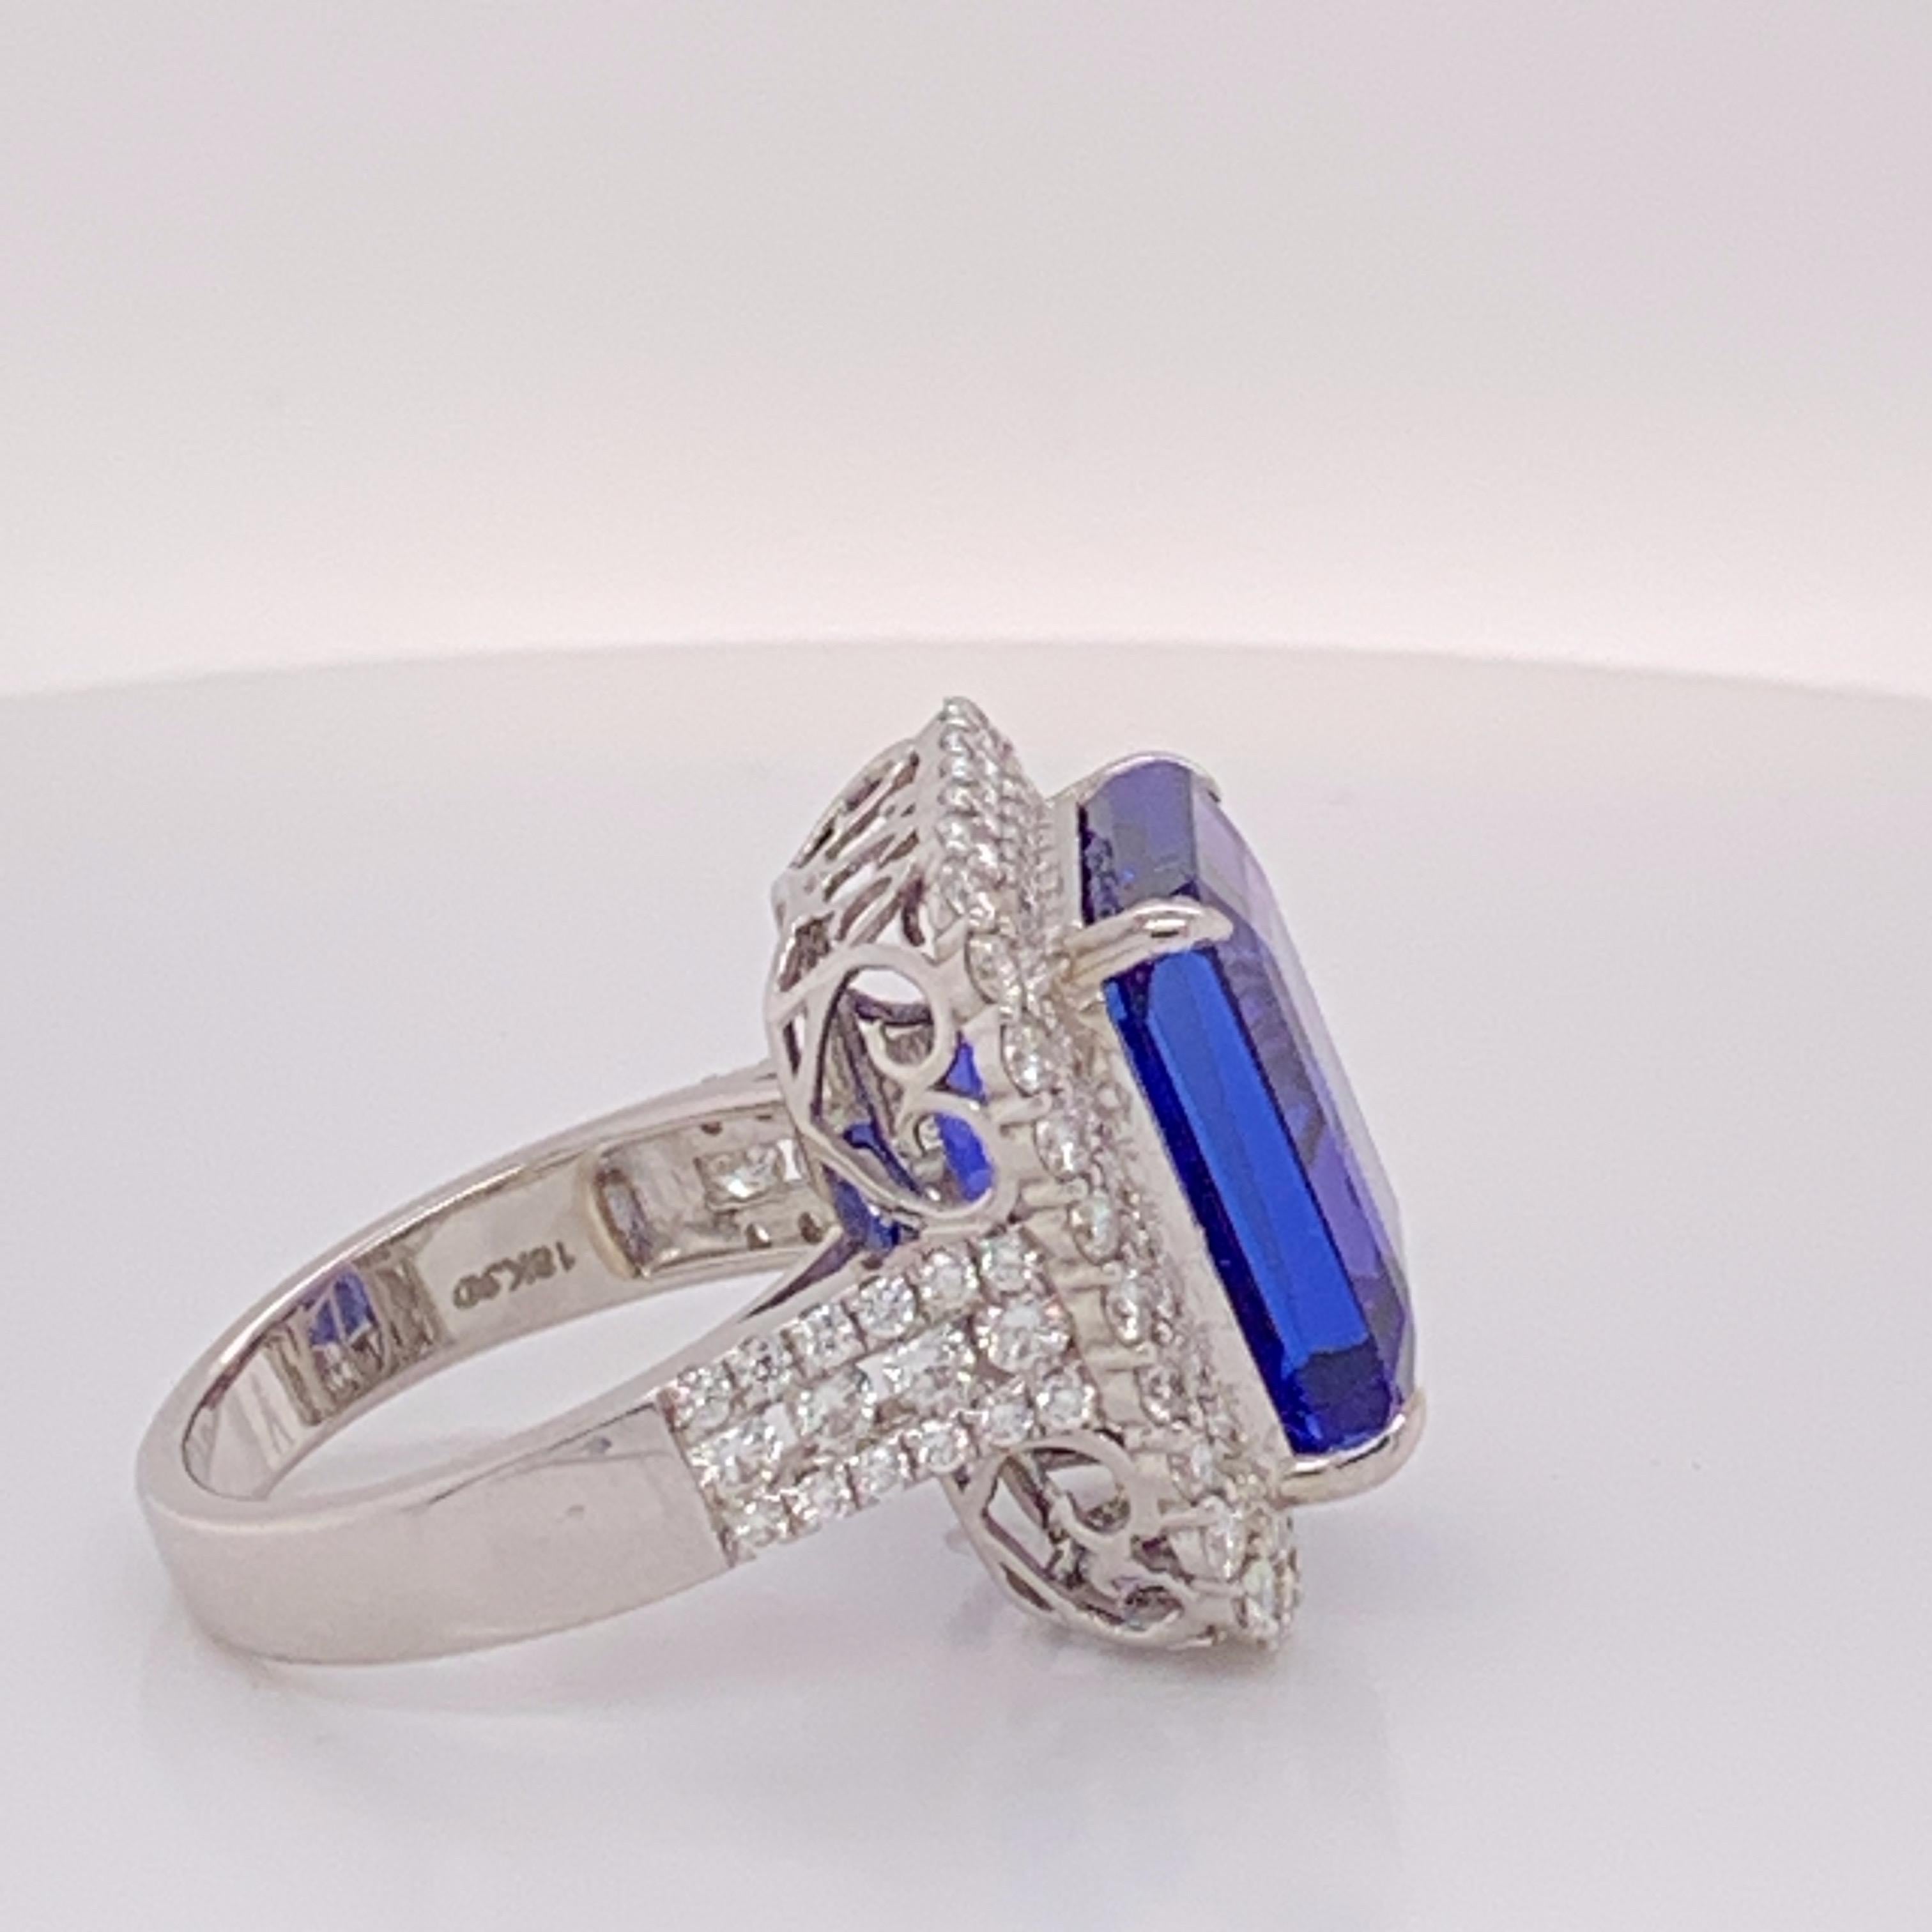 Natural Octagon shape 15.83 Carat Tanzanite and 1.65 Carat Round white Diamond set in 18 Karat gold is one of a kind Ring . The ring is Sizeable 7.5. 

The  Tanzanite is certified by AGL lab. If you have any question regarding this ring please feel